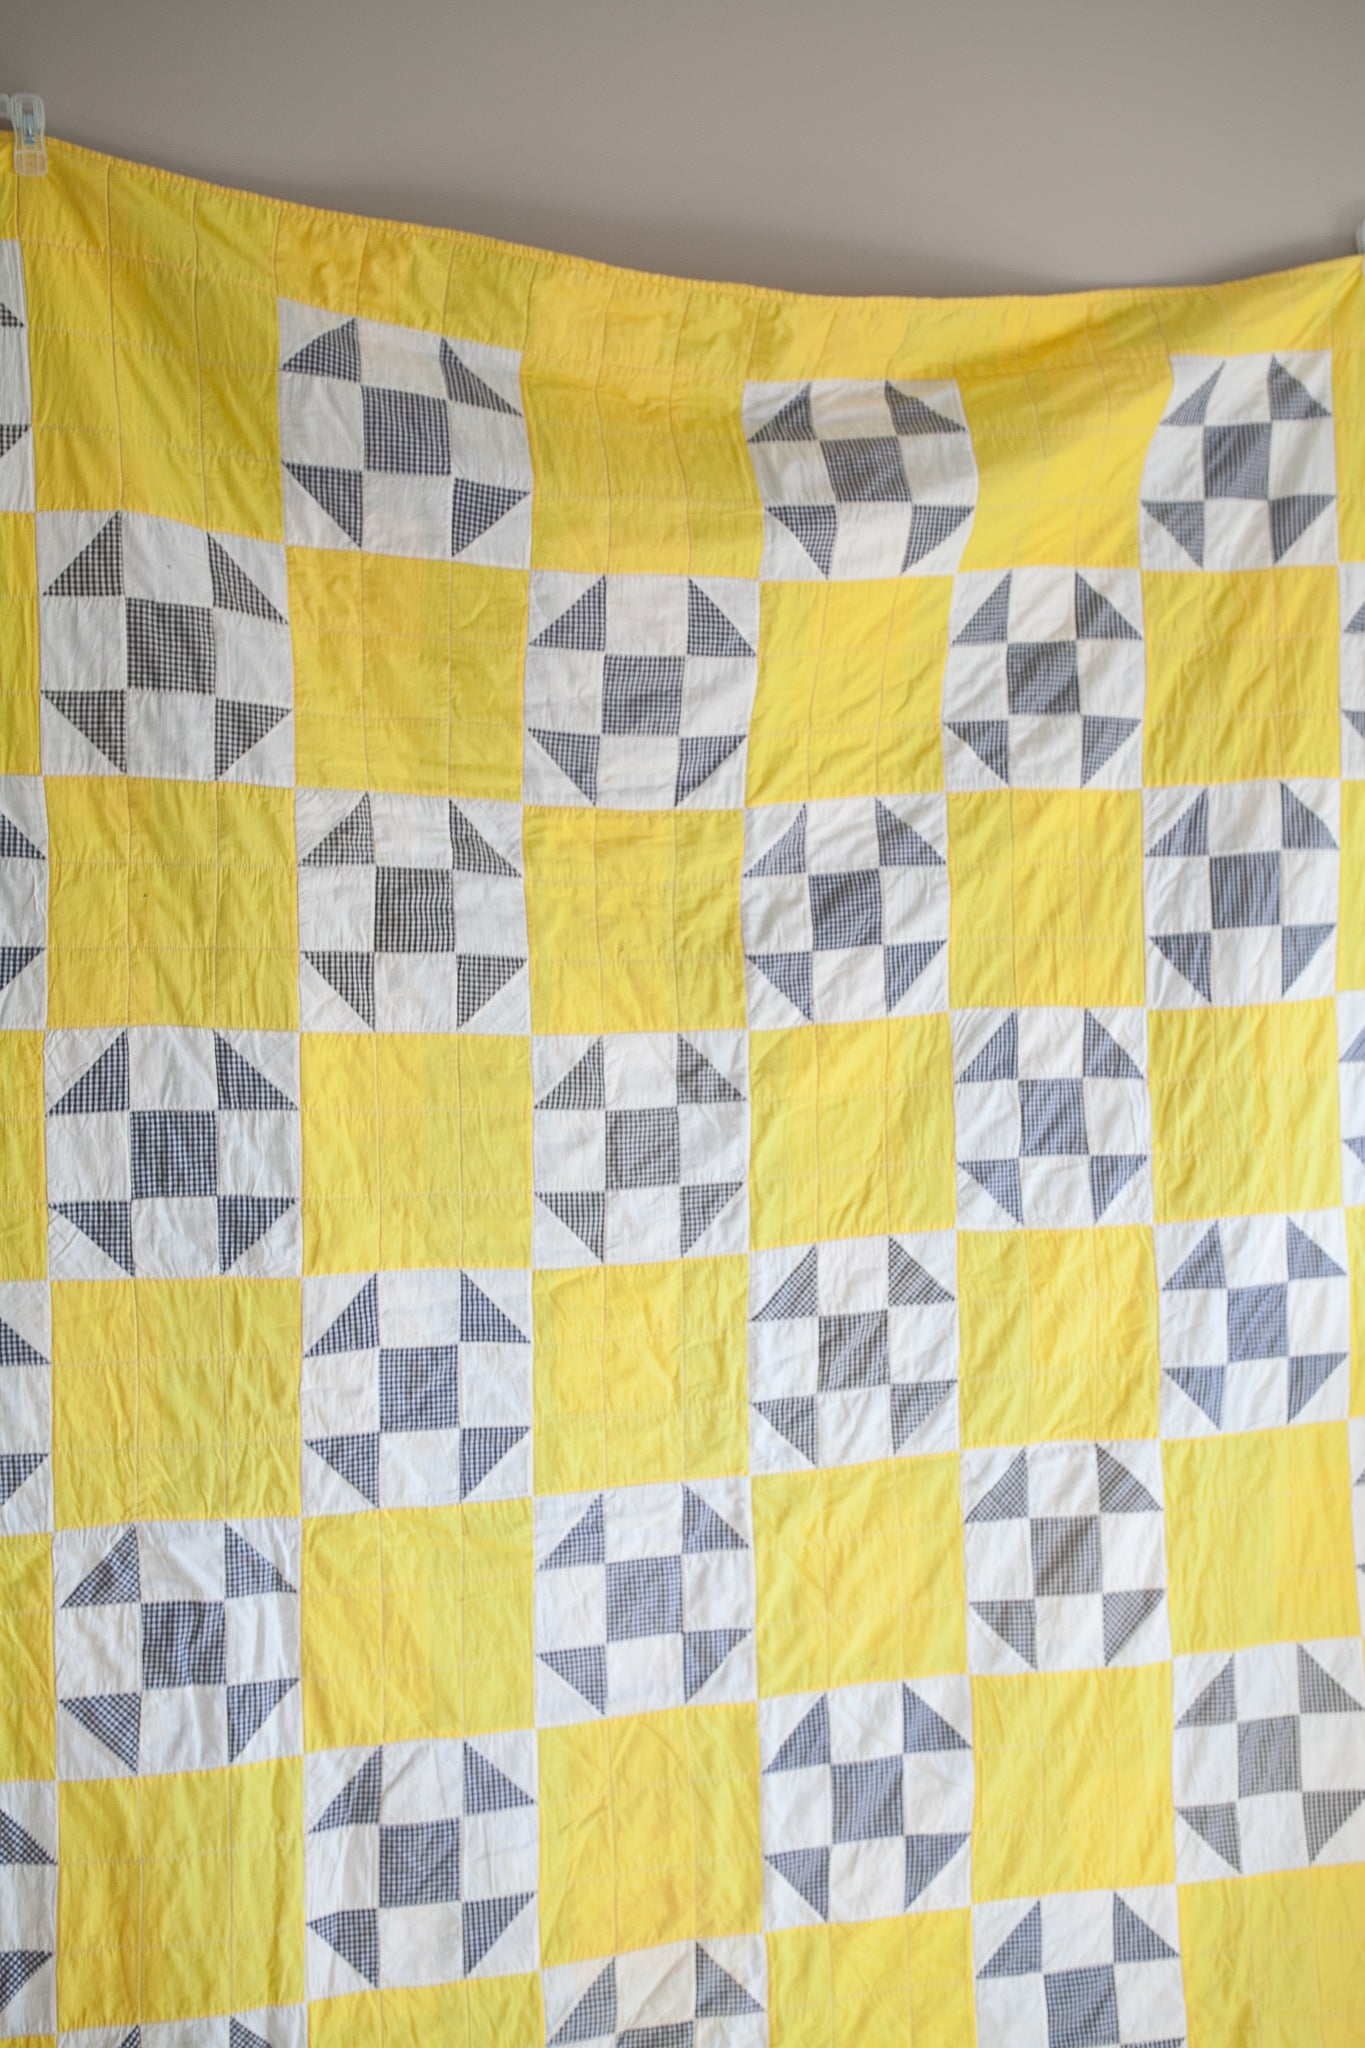 Vintage Quilt - Yellow Quilt -Shoo Fly Quilt